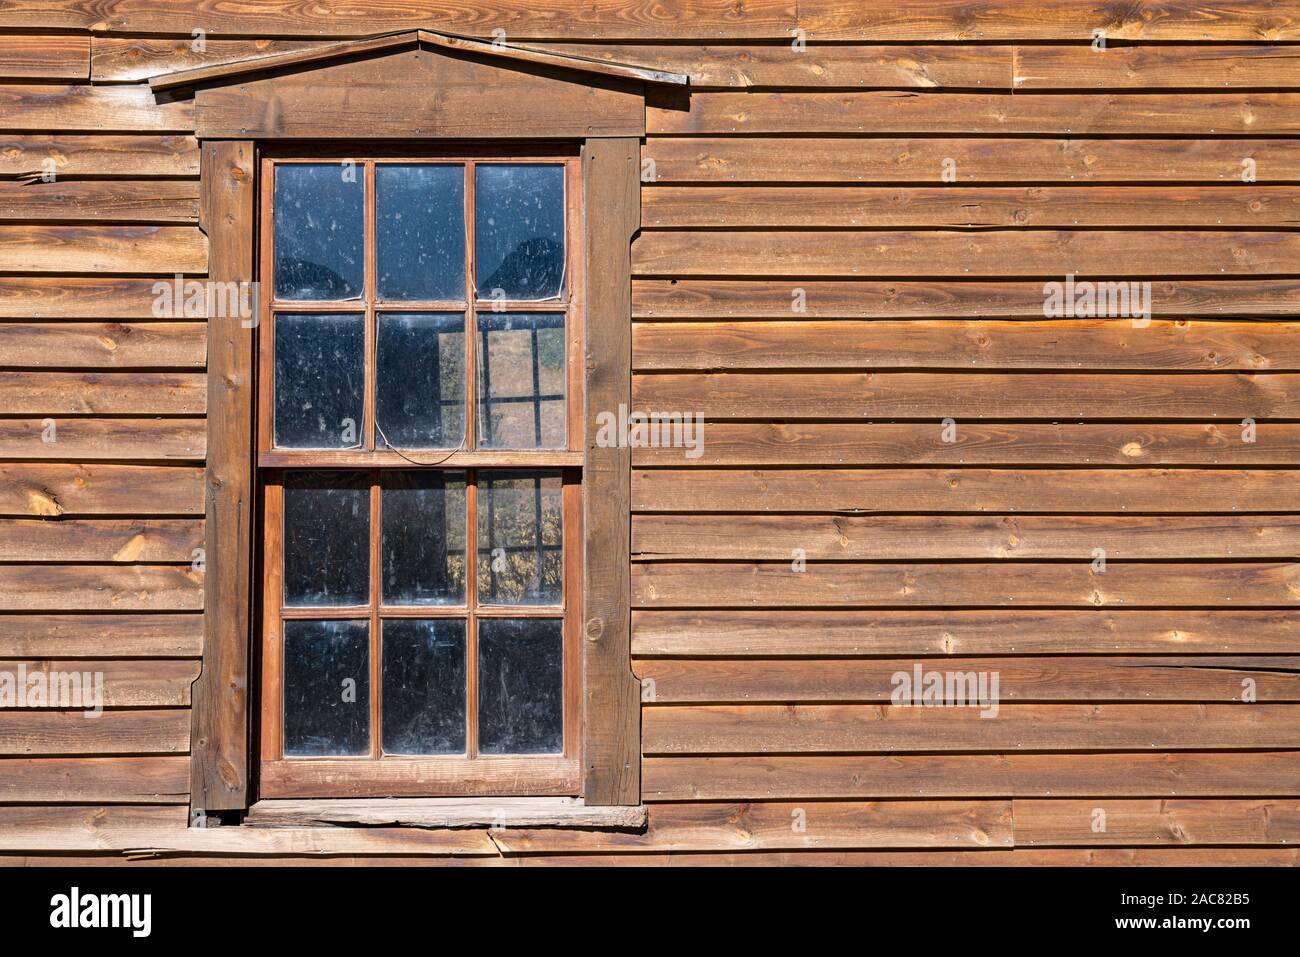 Window in an old wooden weathered building Stock Photo